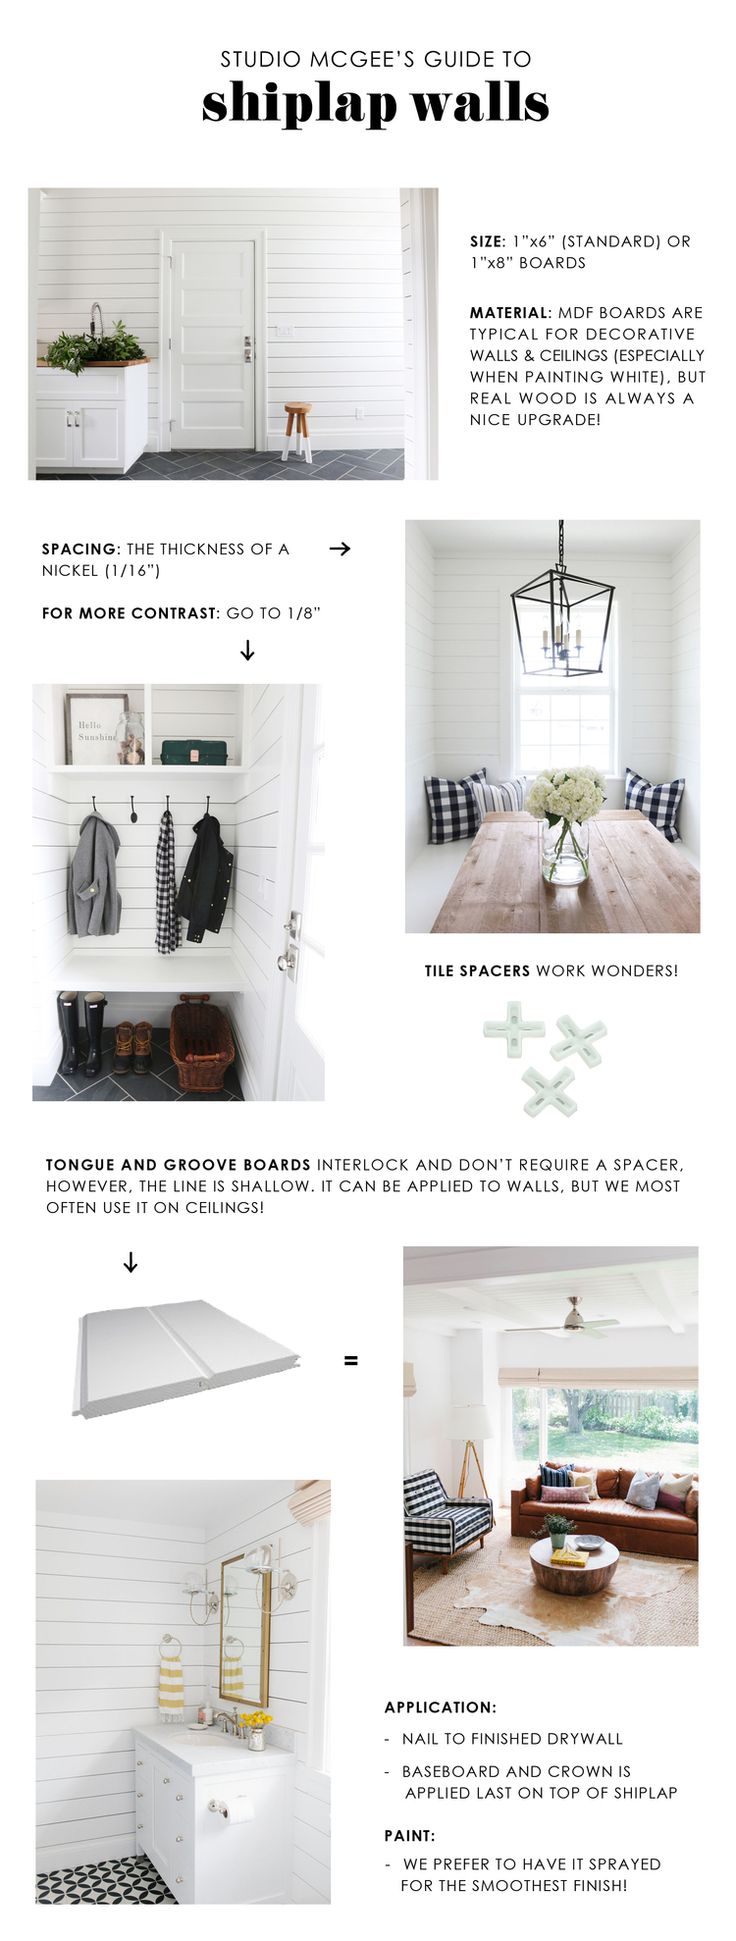 Studio McGee's Guide to Shiplap Walls